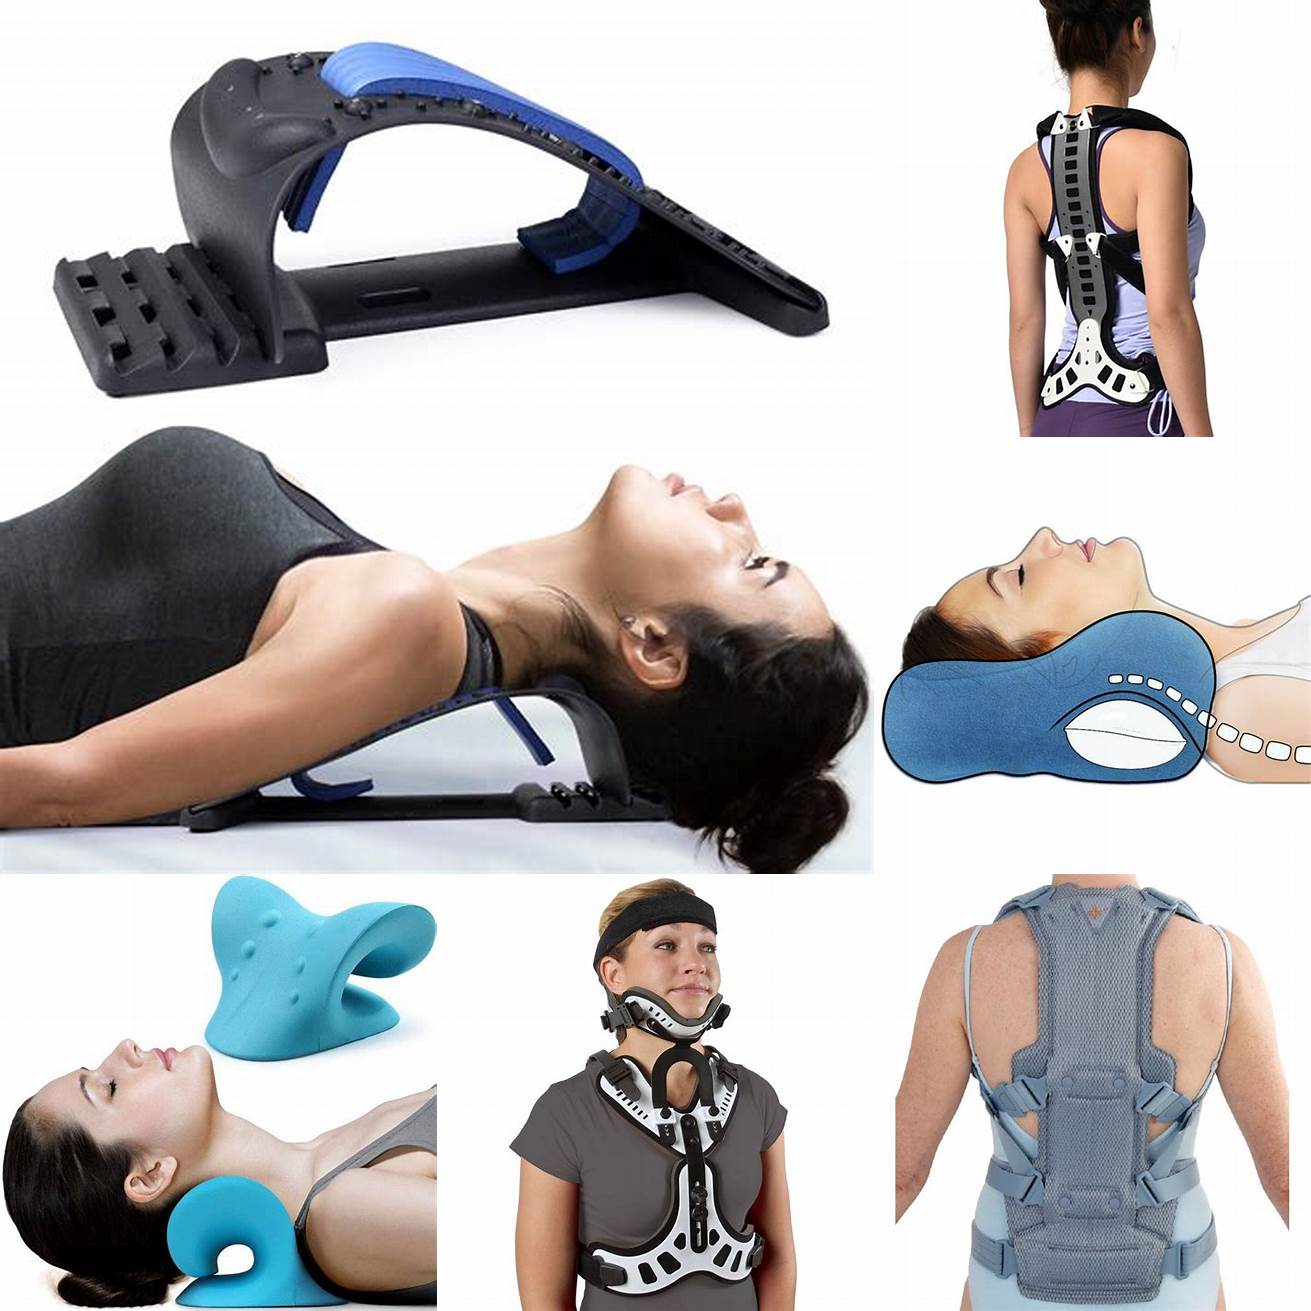 Superior support for your back and neck